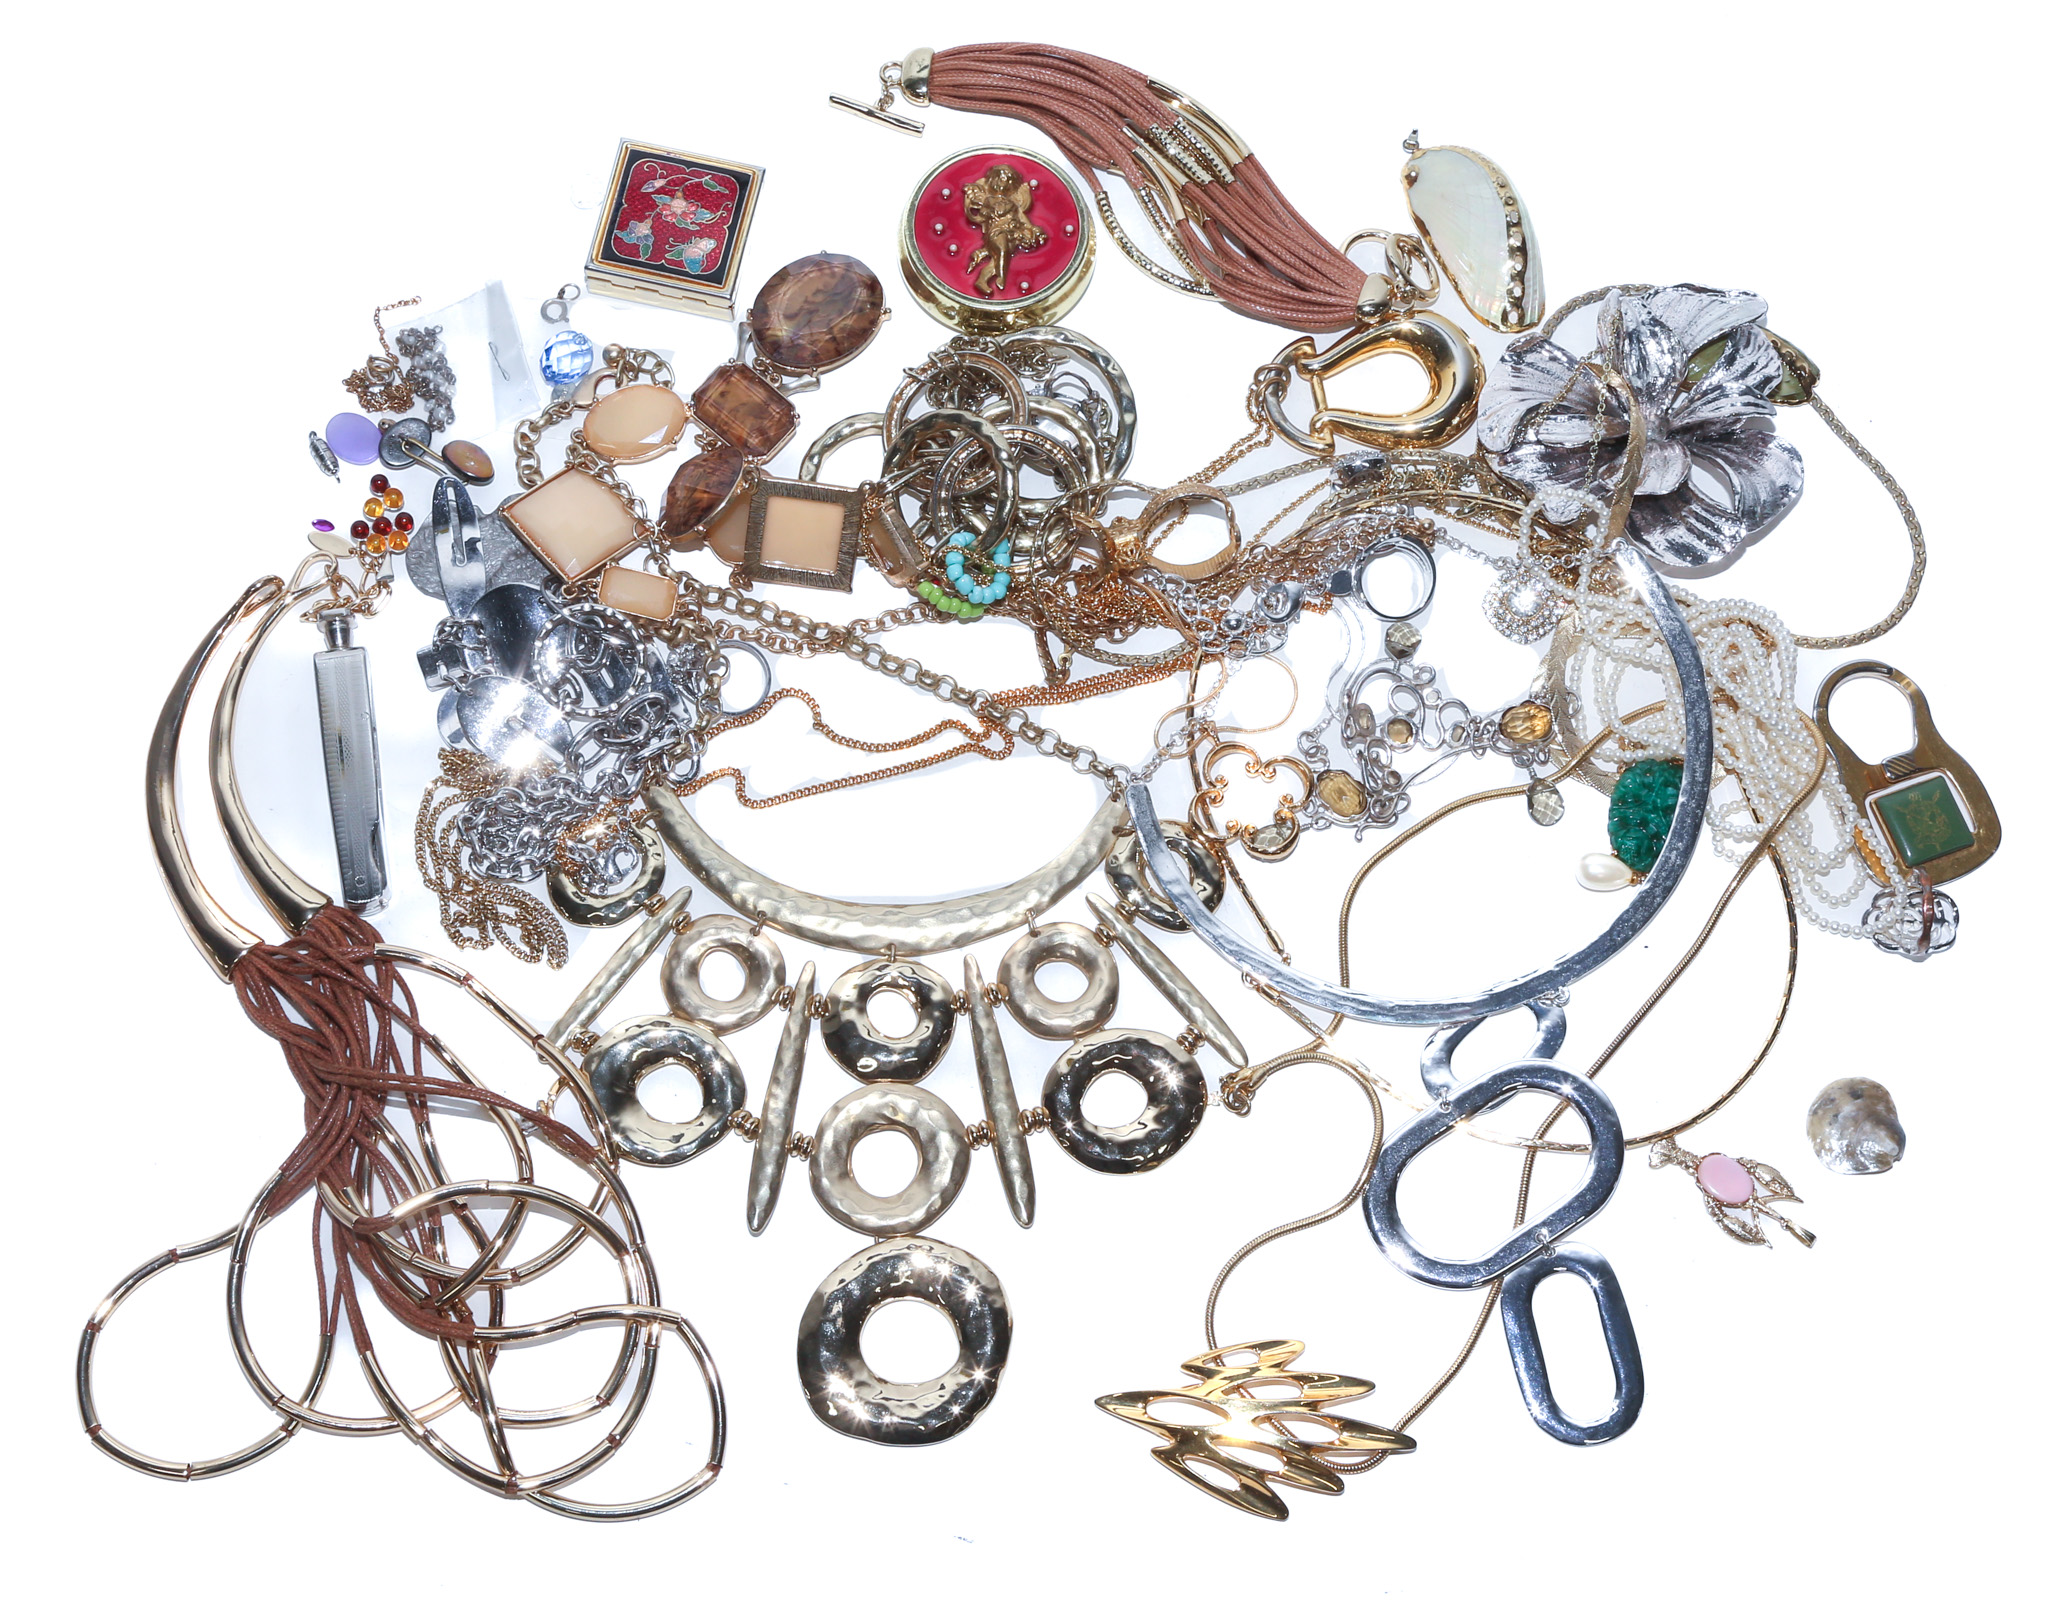 AN ECLECTIC MIX OF FASHION JEWELRY 2ea689